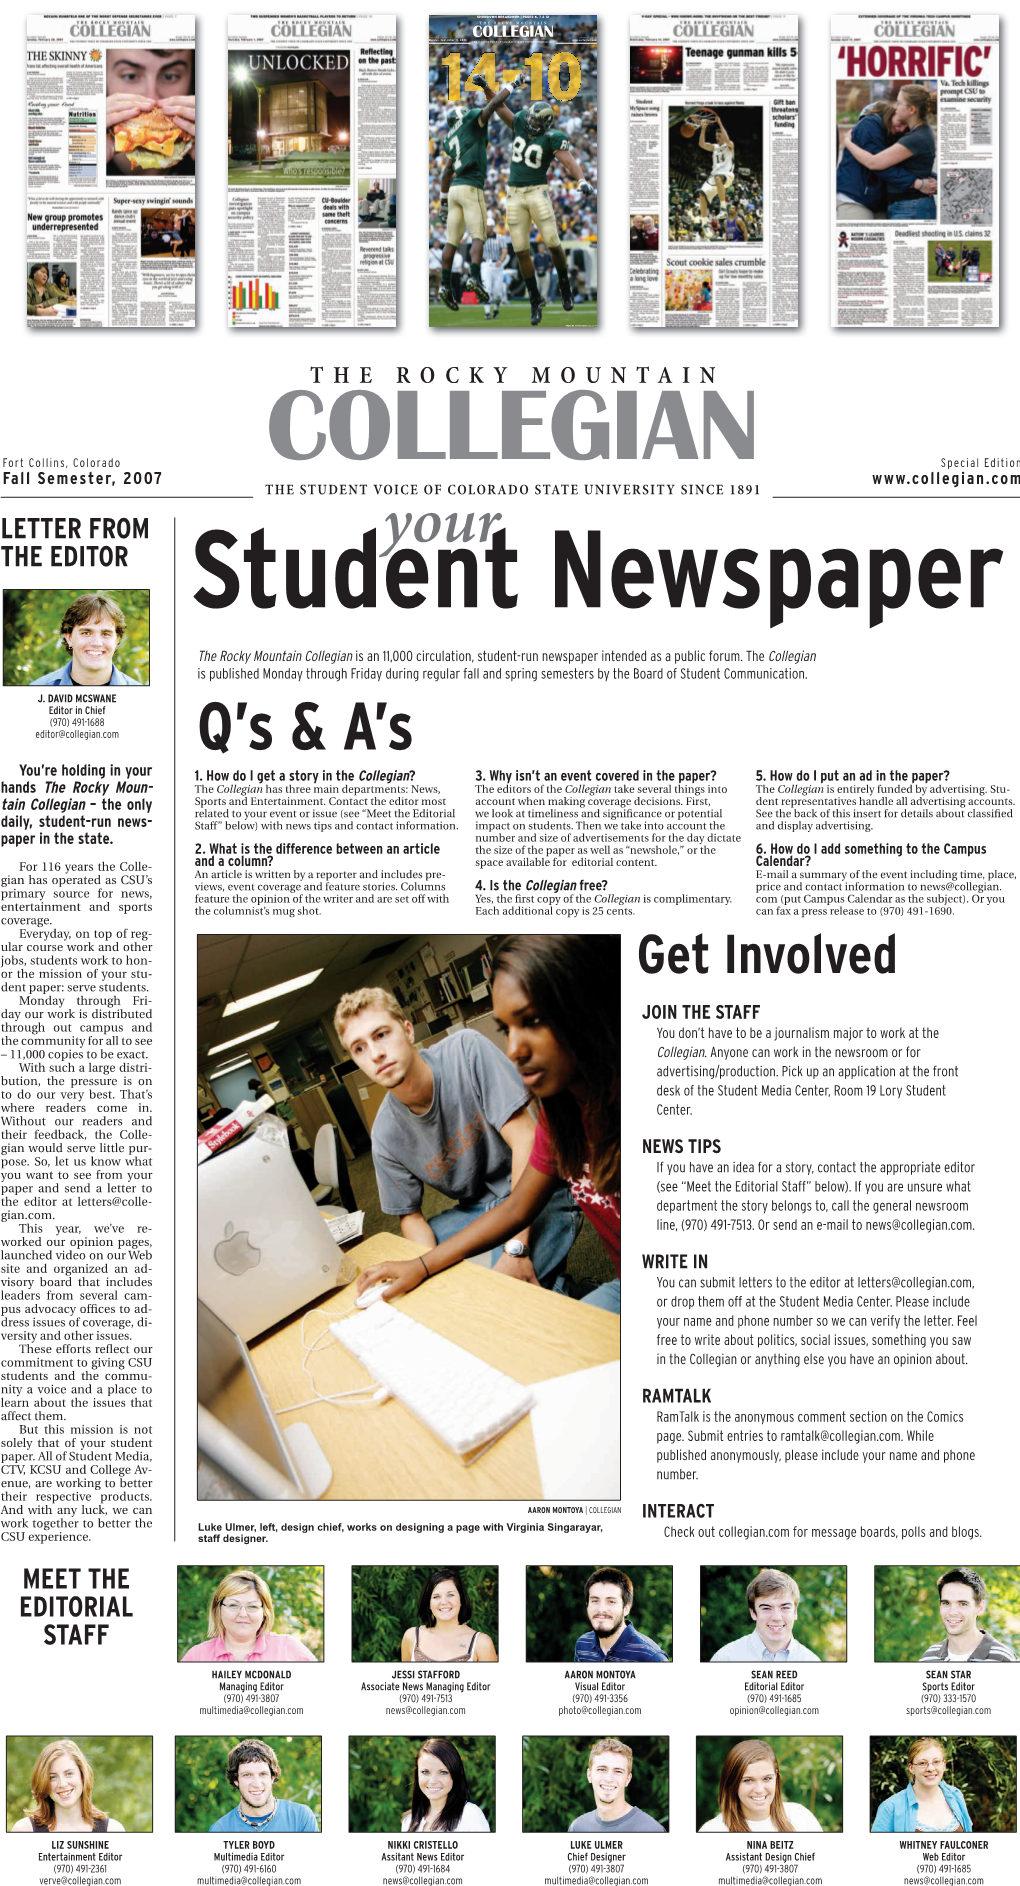 CSU’S an Article Is Written by a Reporter and Includes Pre- E-Mail a Summary of the Event Including Time, Place, Views, Event Coverage and Feature Stories